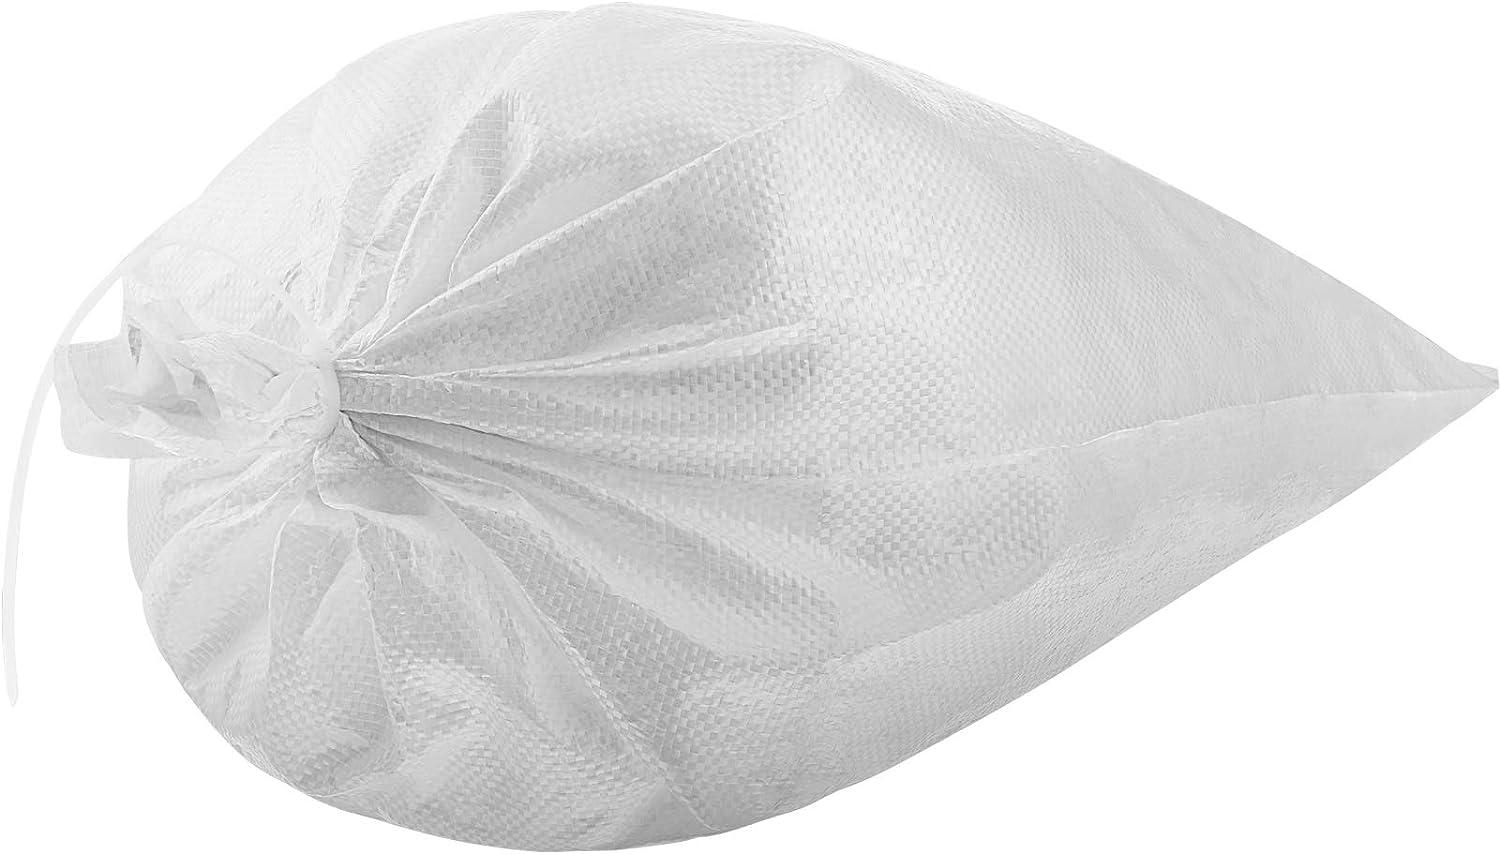 Sand Bag, Sample Bag, 14 X 26 with Tie, 100 bags per pack